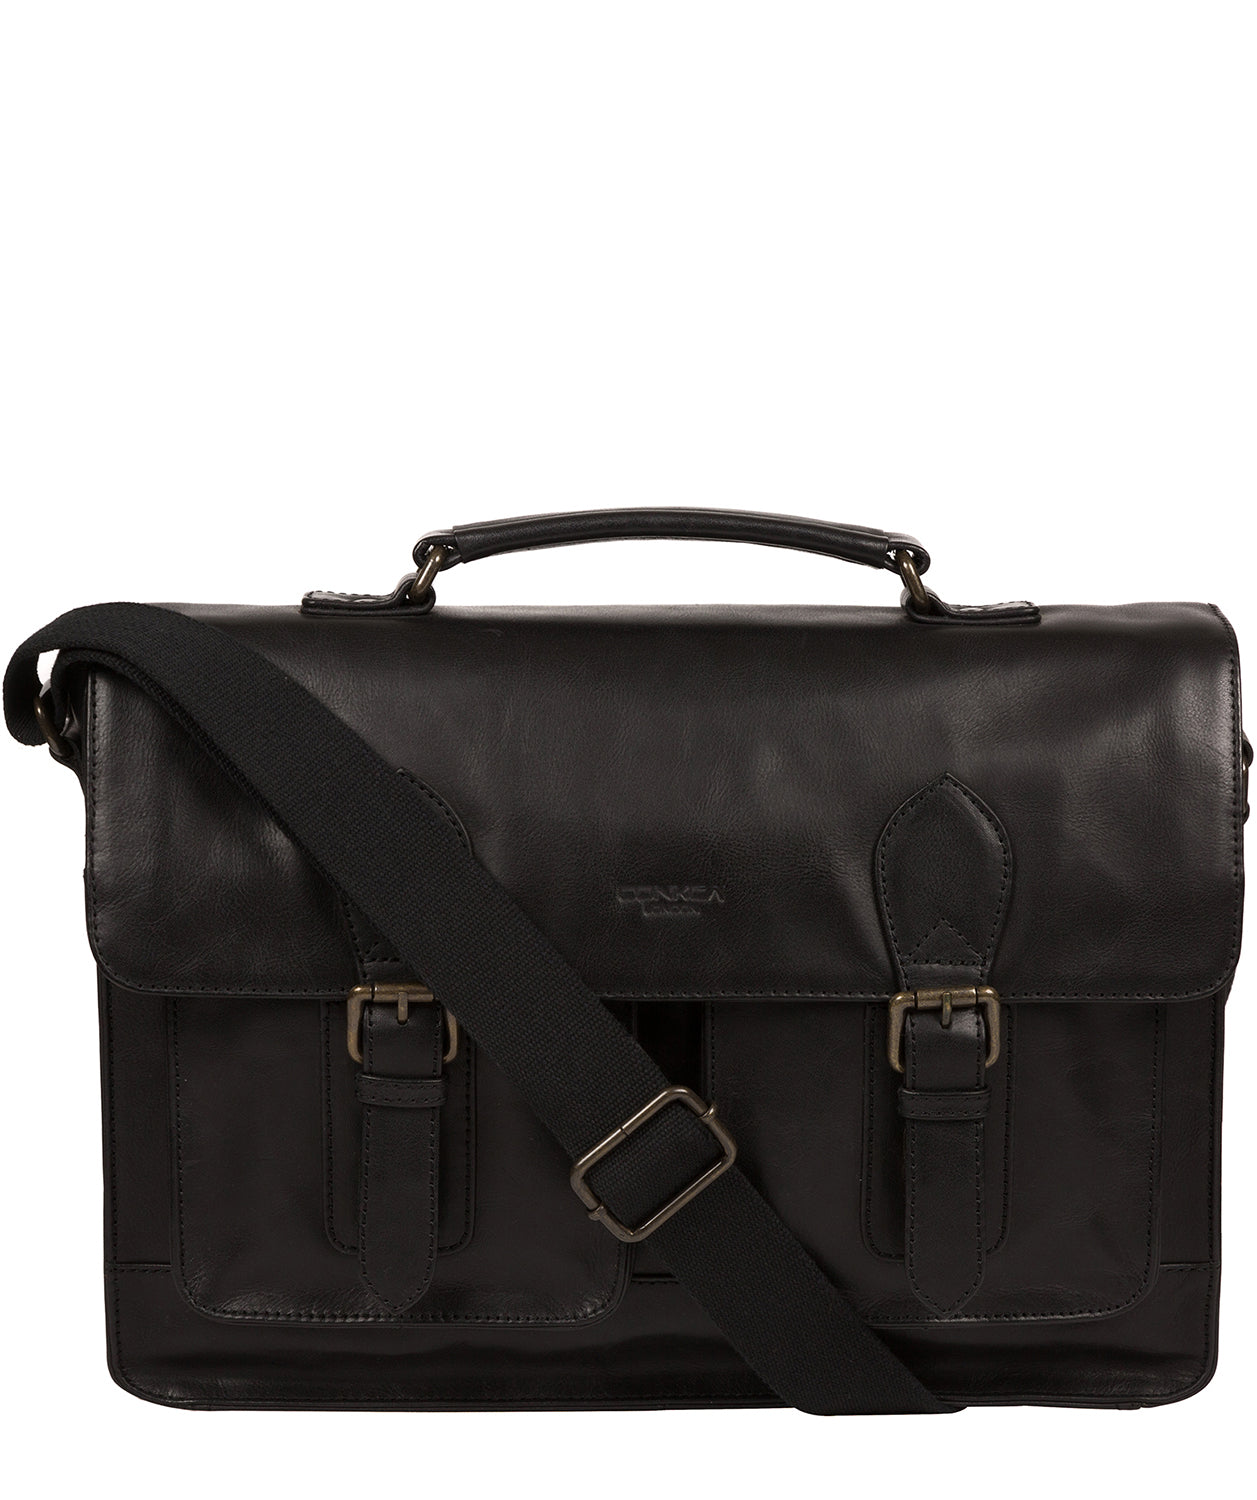 Black Leather Workbag 'Pinter' by Conkca London – Pure Luxuries London